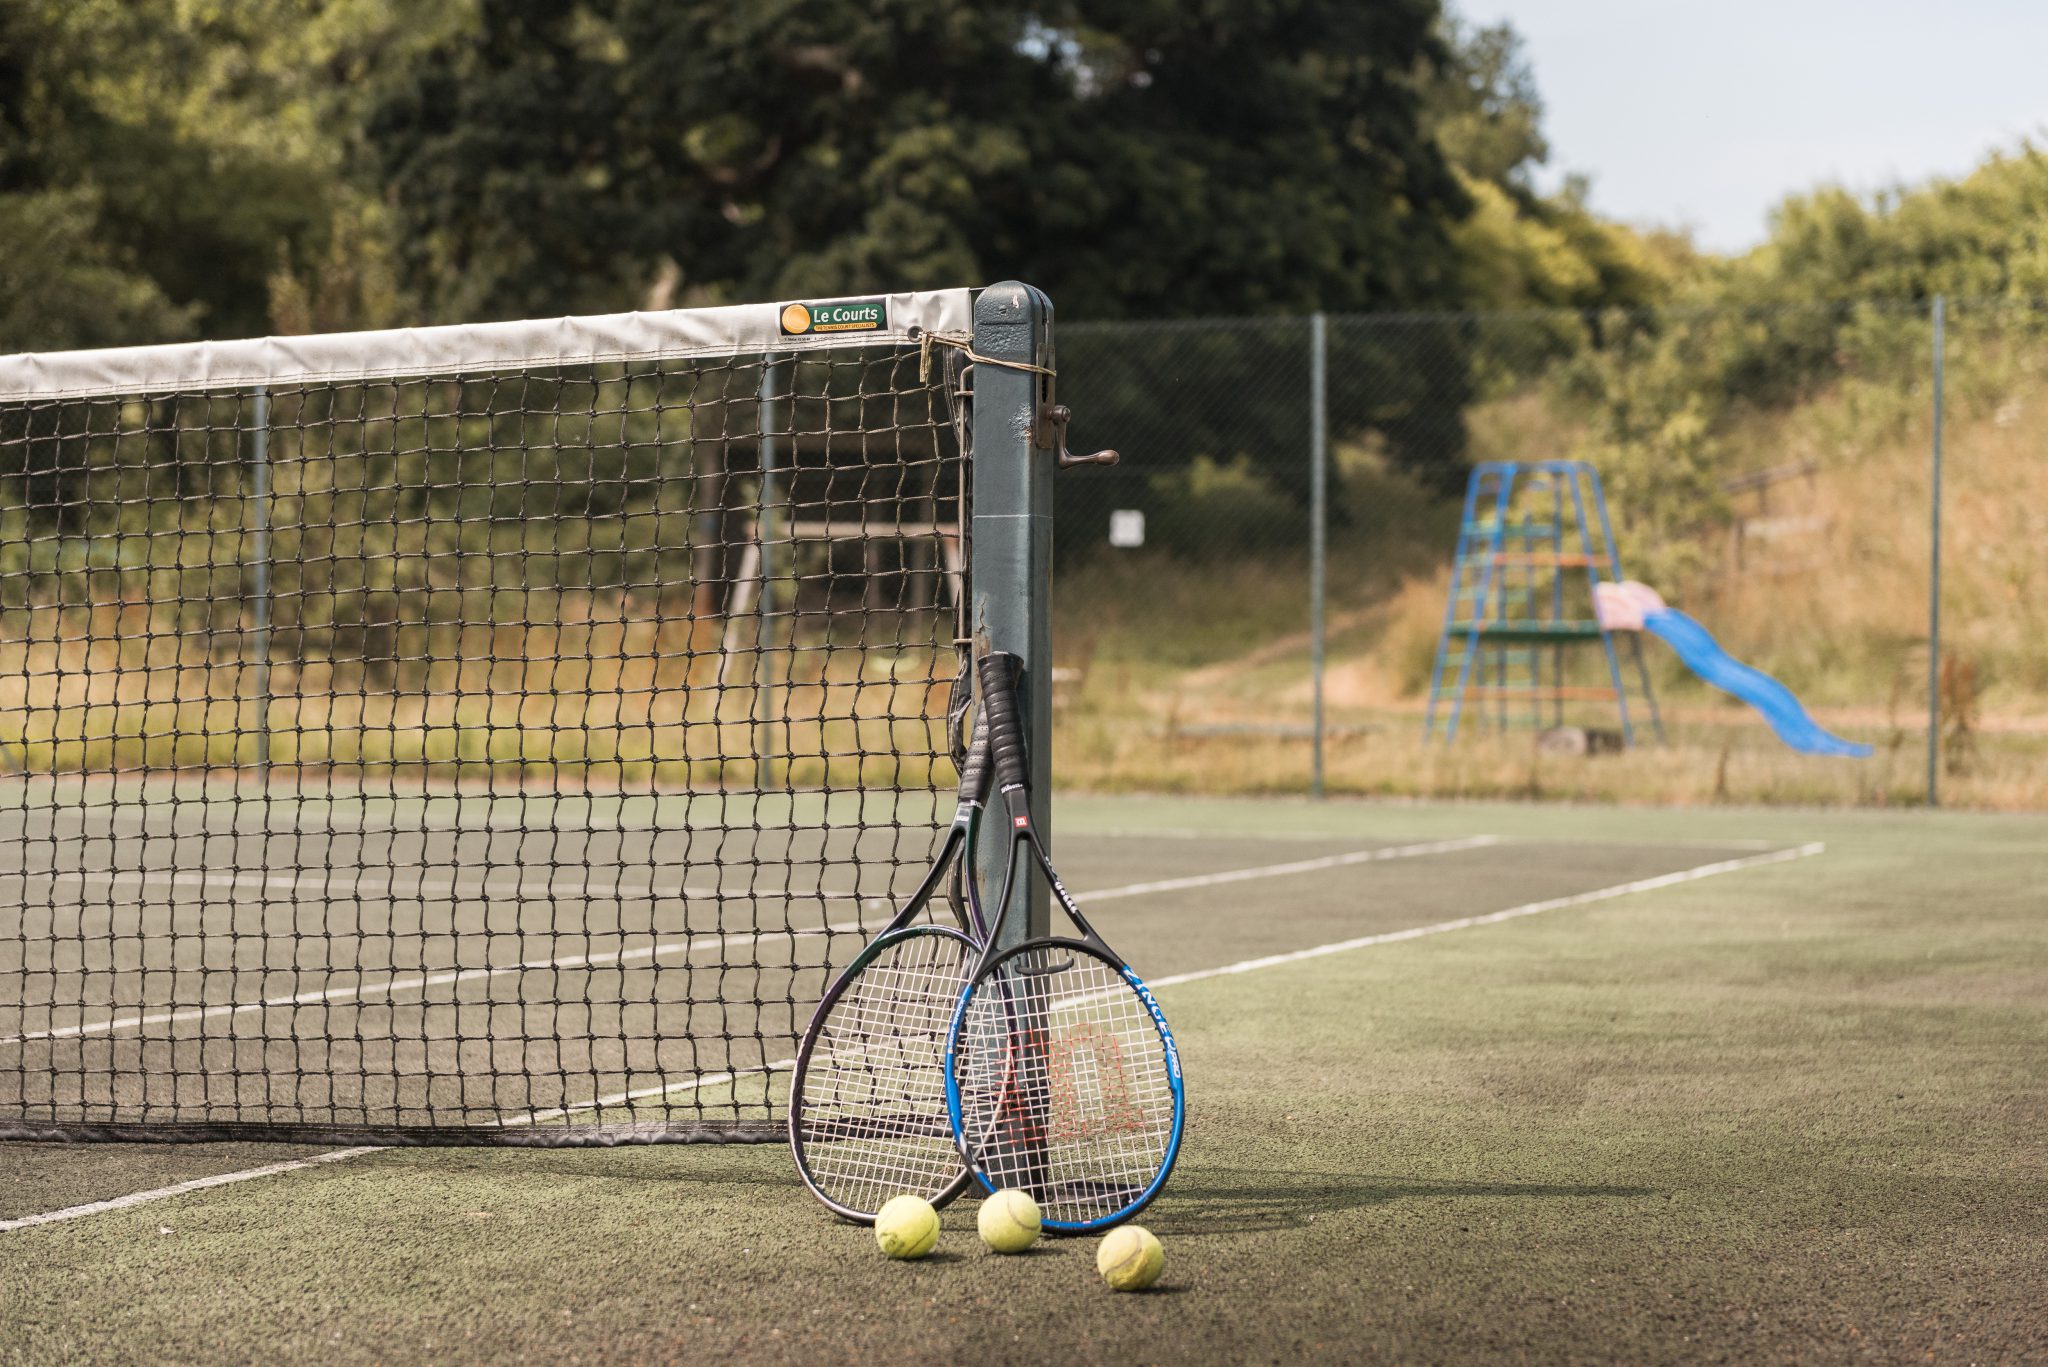 Tennis lessons for children over summer holidays